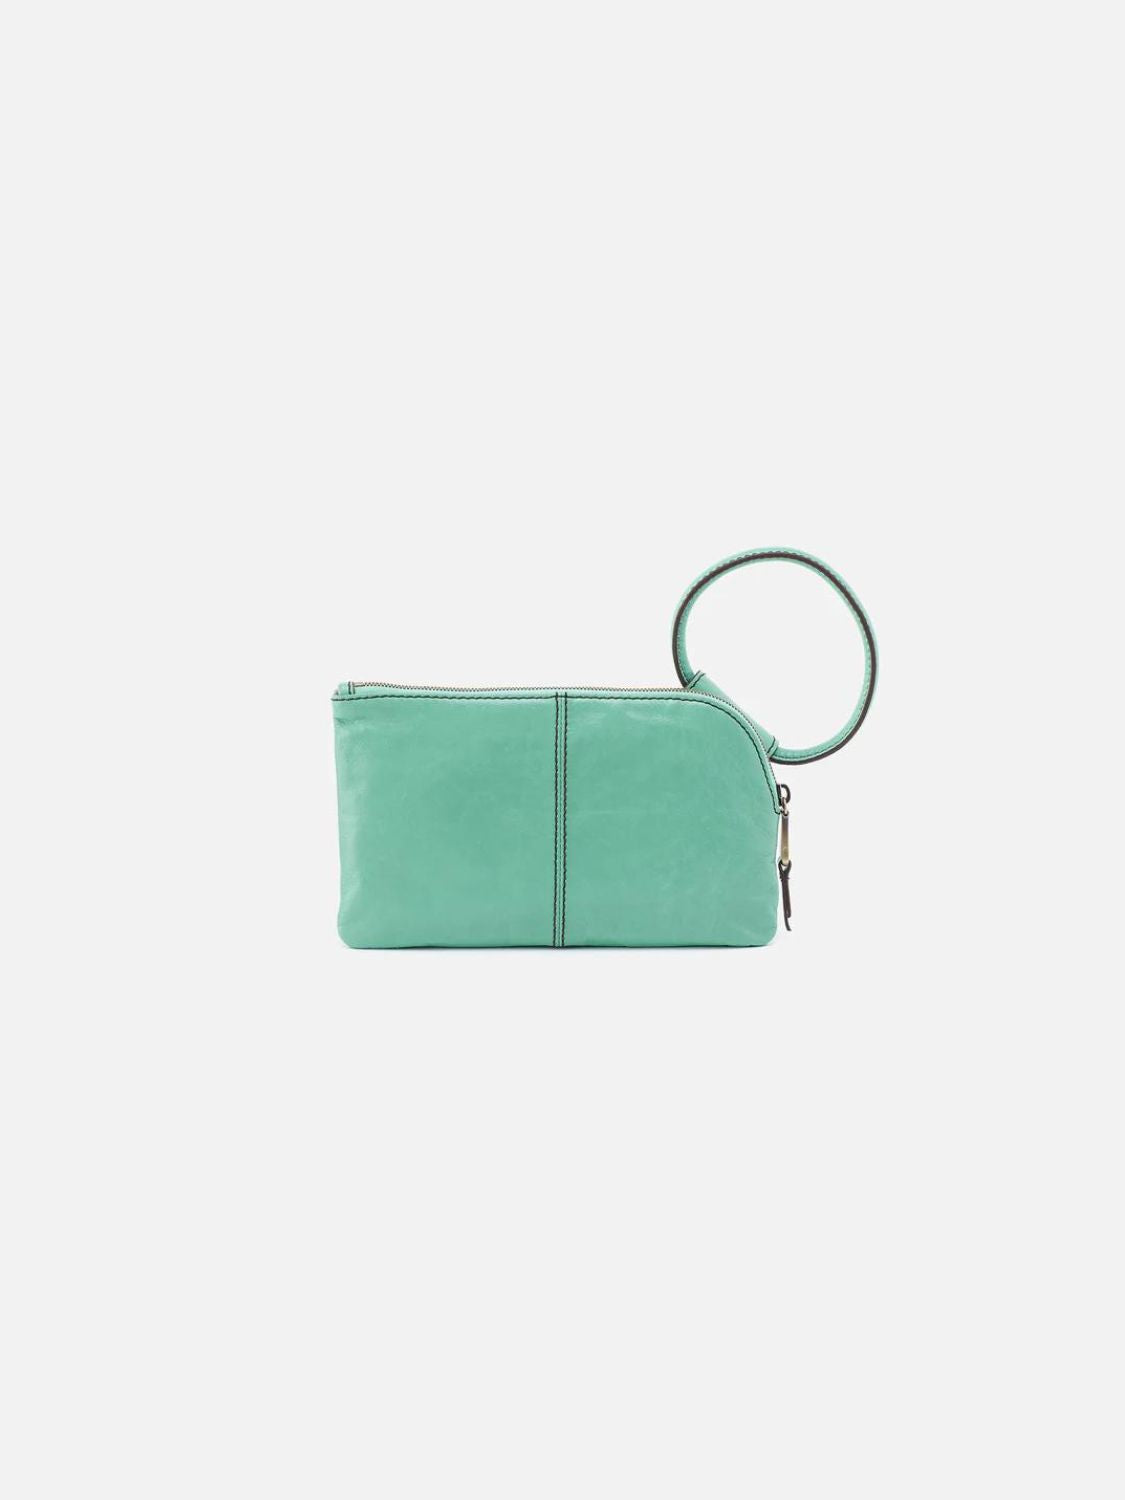 hobo sable polished leather wristlet in seaglass-back 